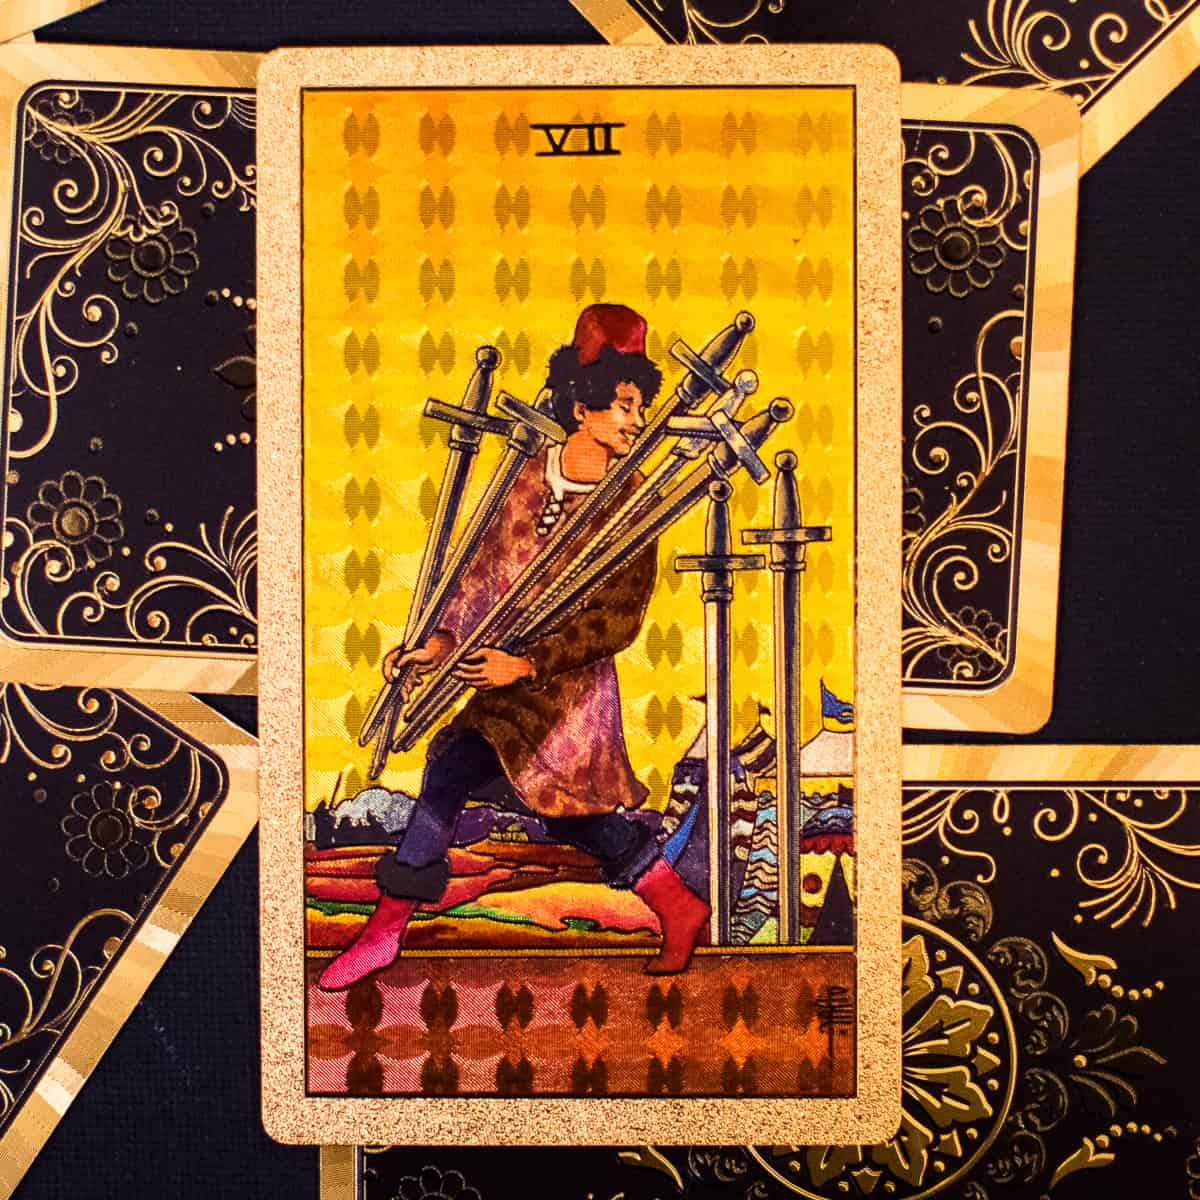 A person carrying 5 swords away while leaving 2 behind depicted on a tarot card.